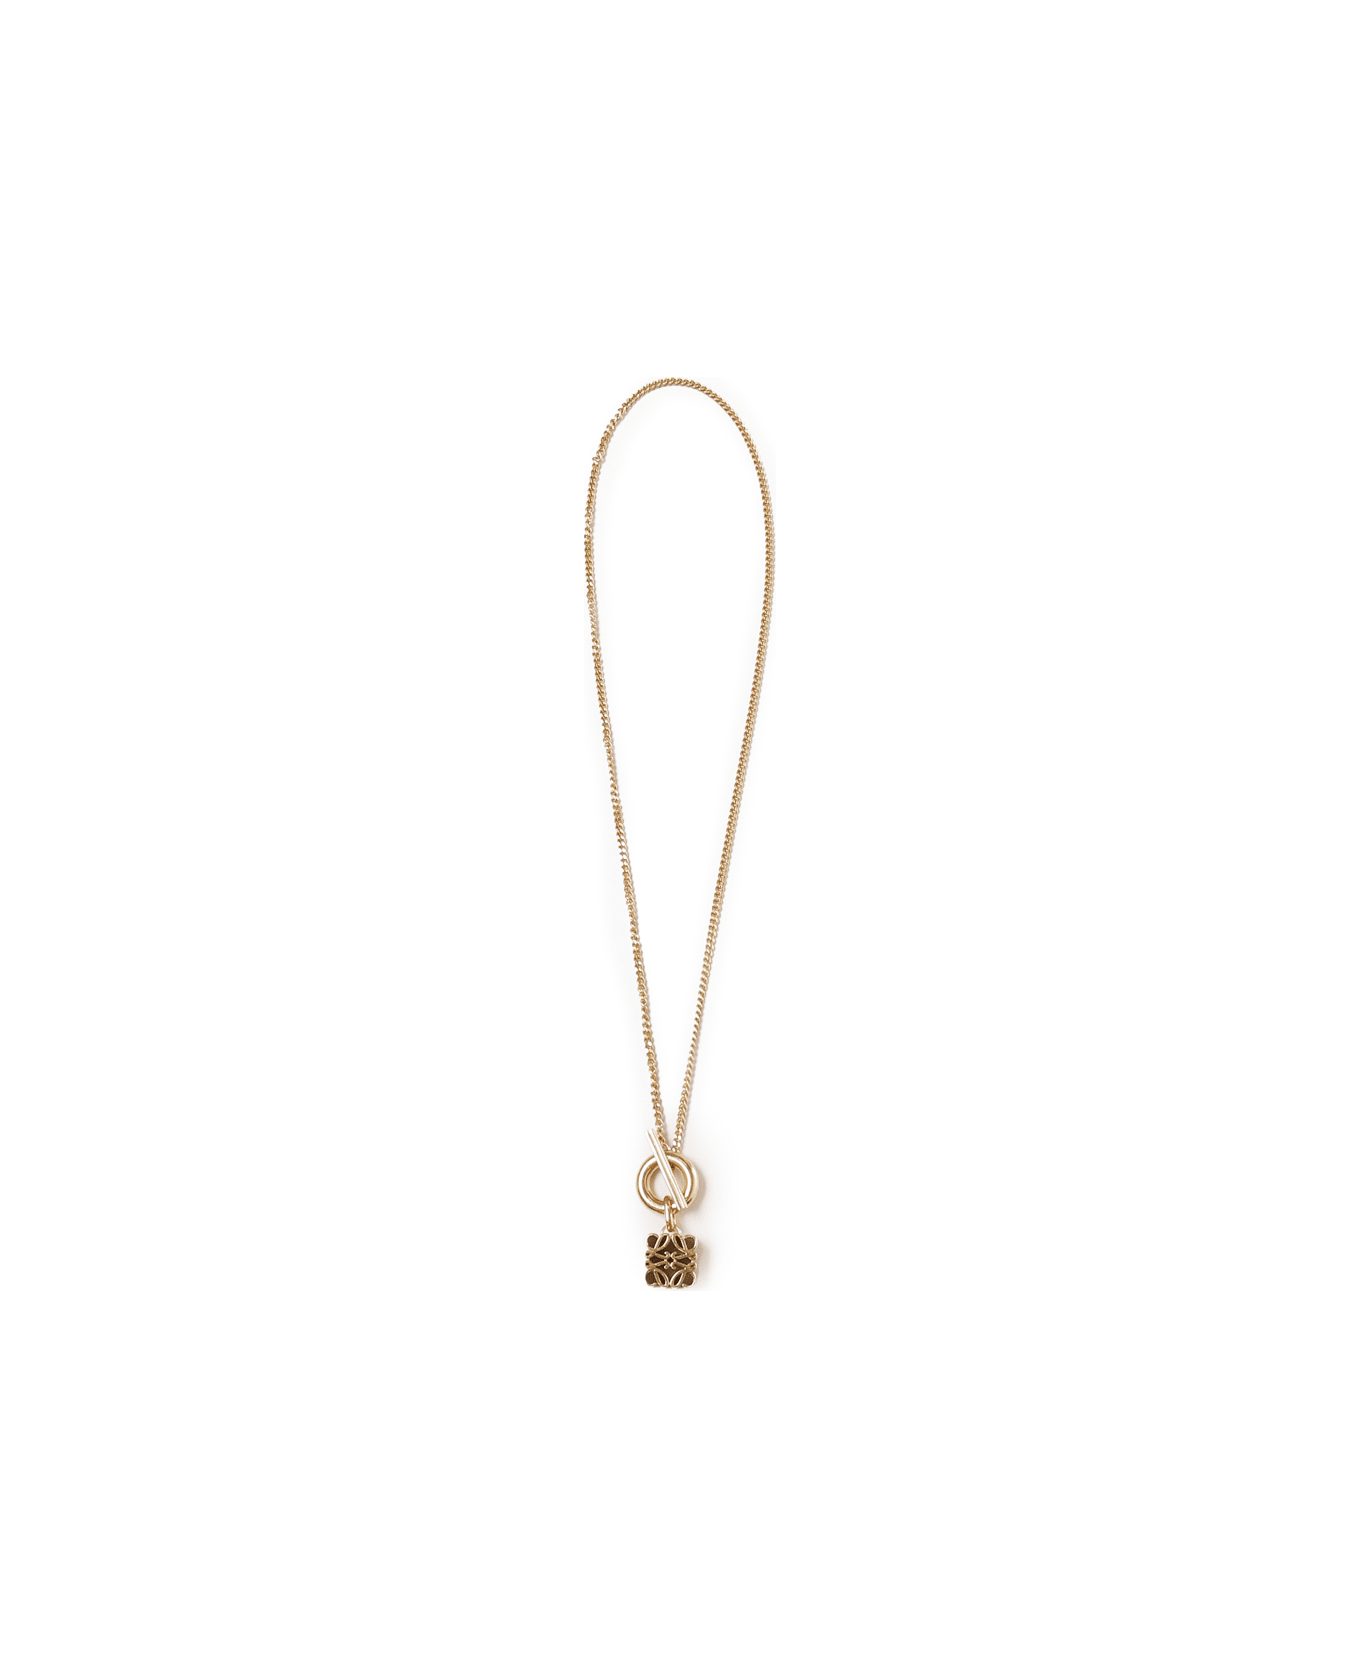 Loewe Anagram Pendant Necklace - Gold ネックレス